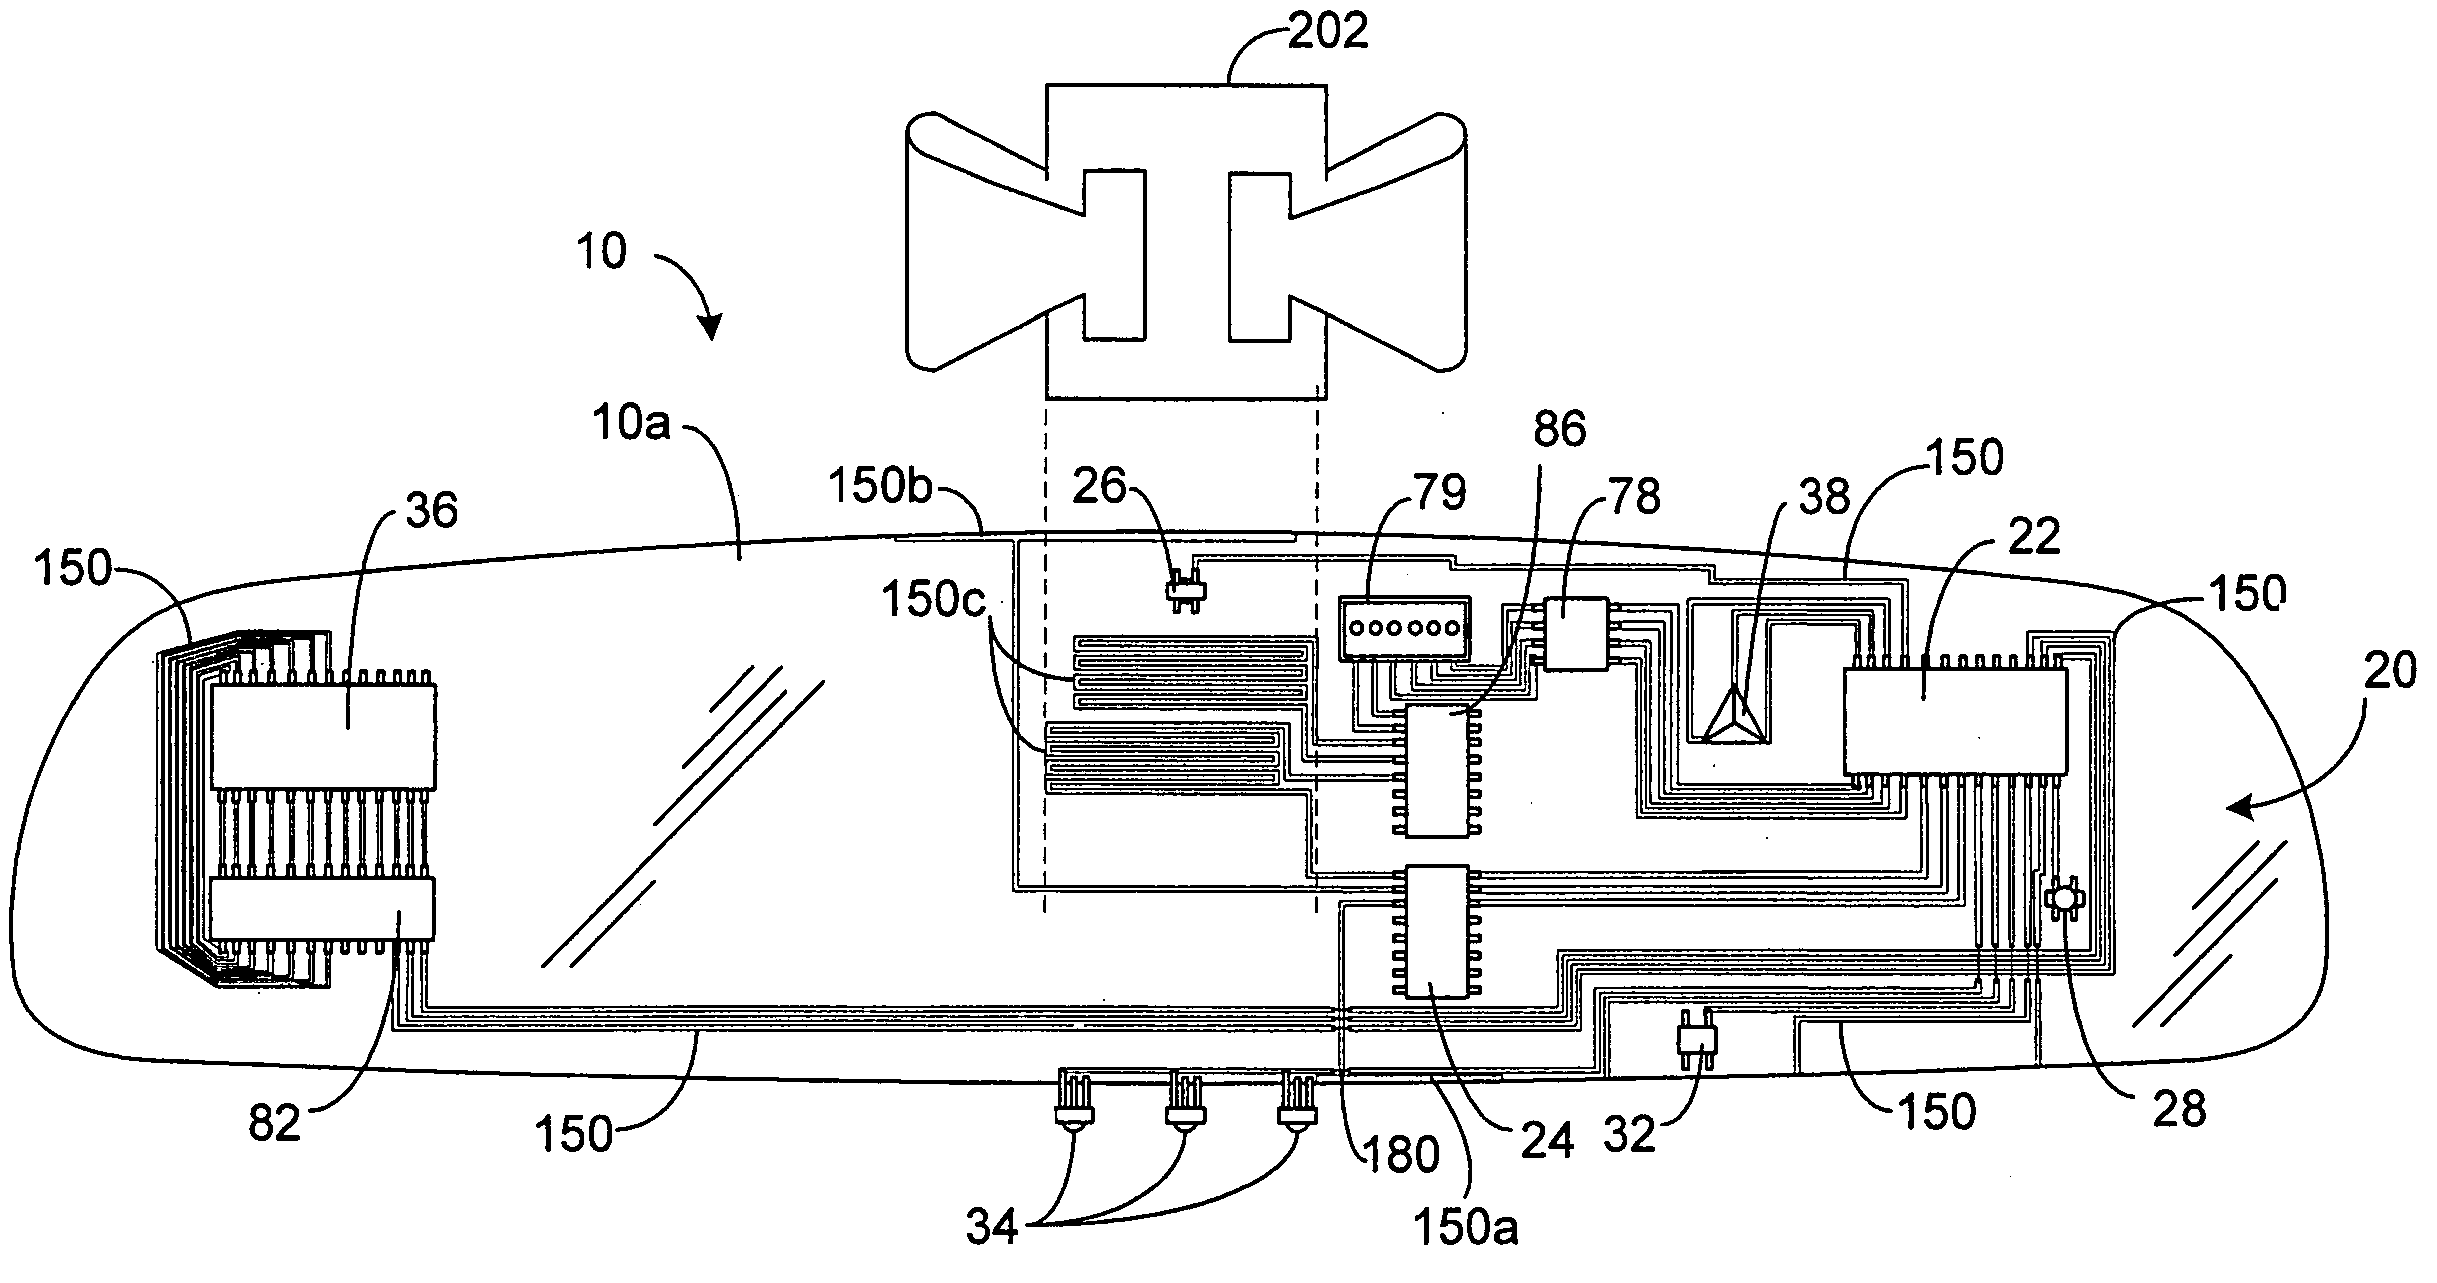 Rearview mirror element having a circuit mounted to the rear surface of the element